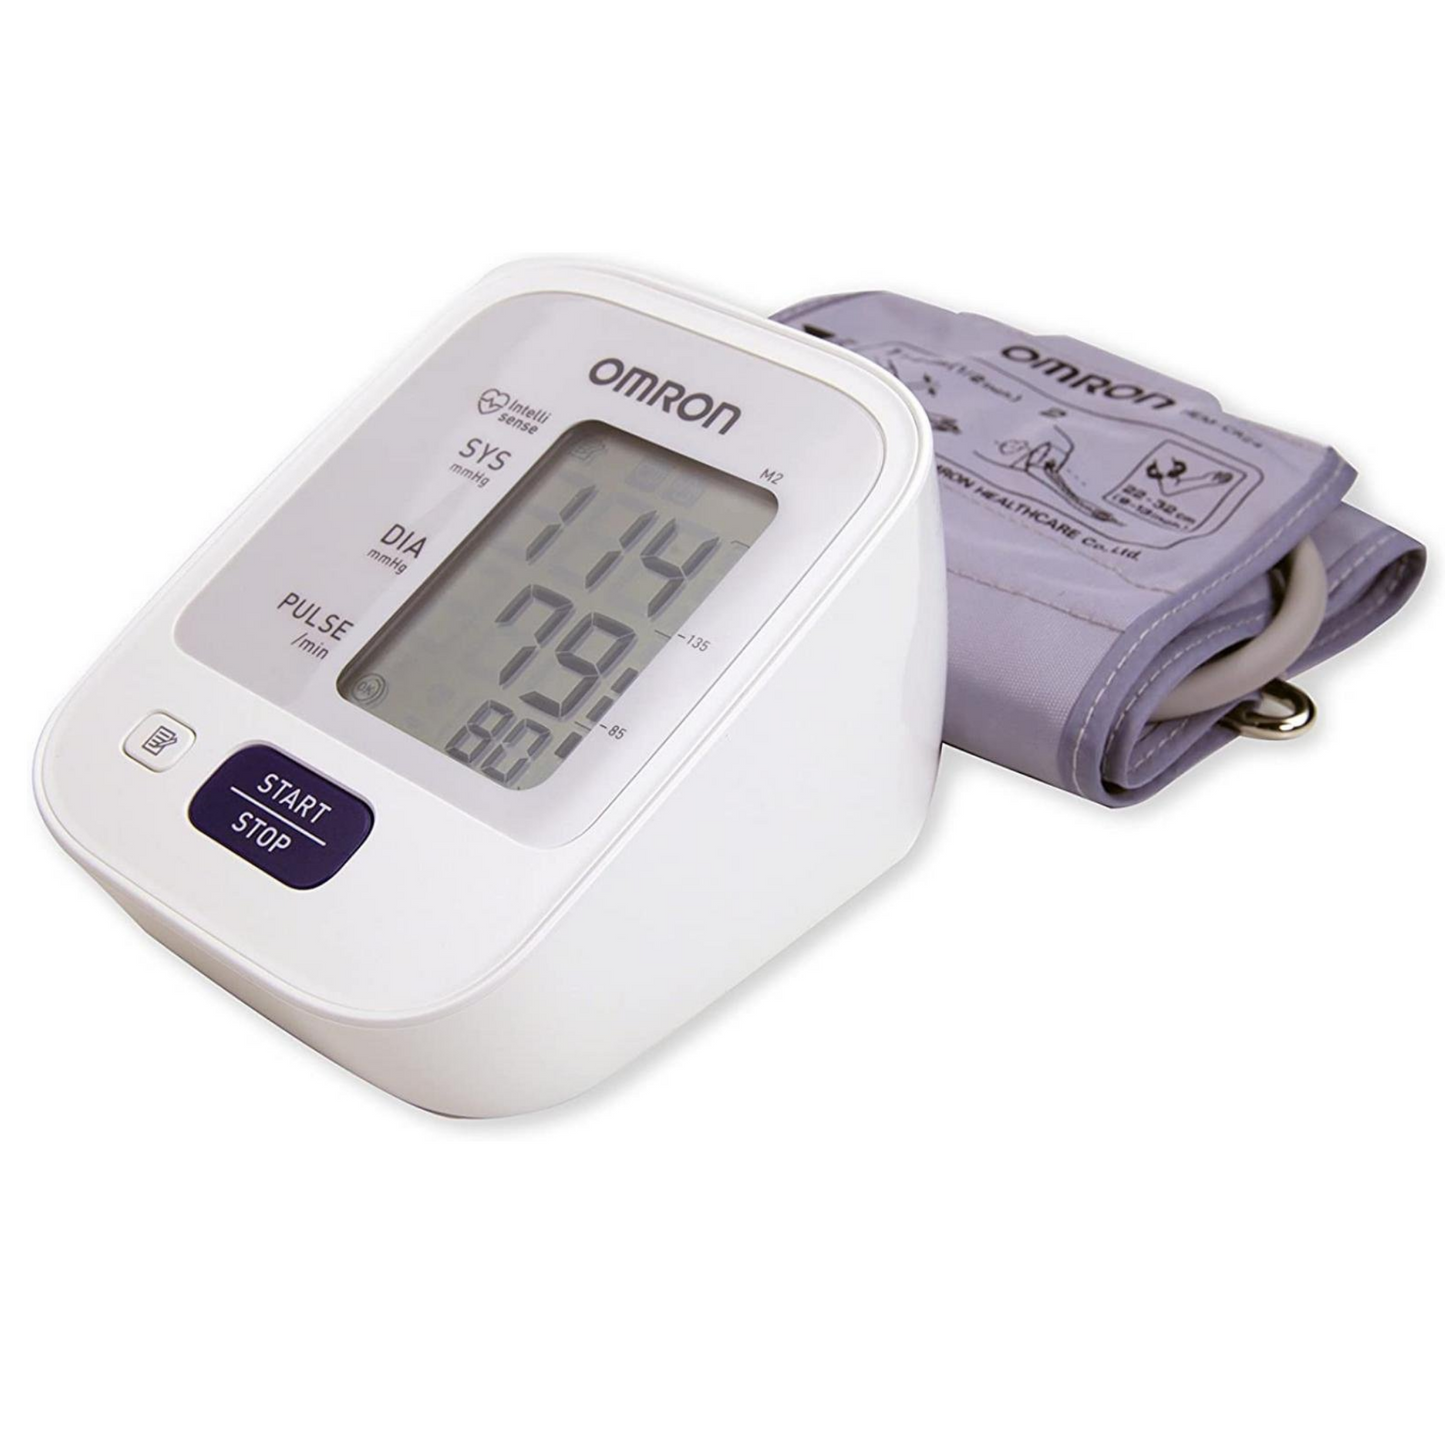 Omron M2 Blood Pressure (BP) Monitor - With Memory